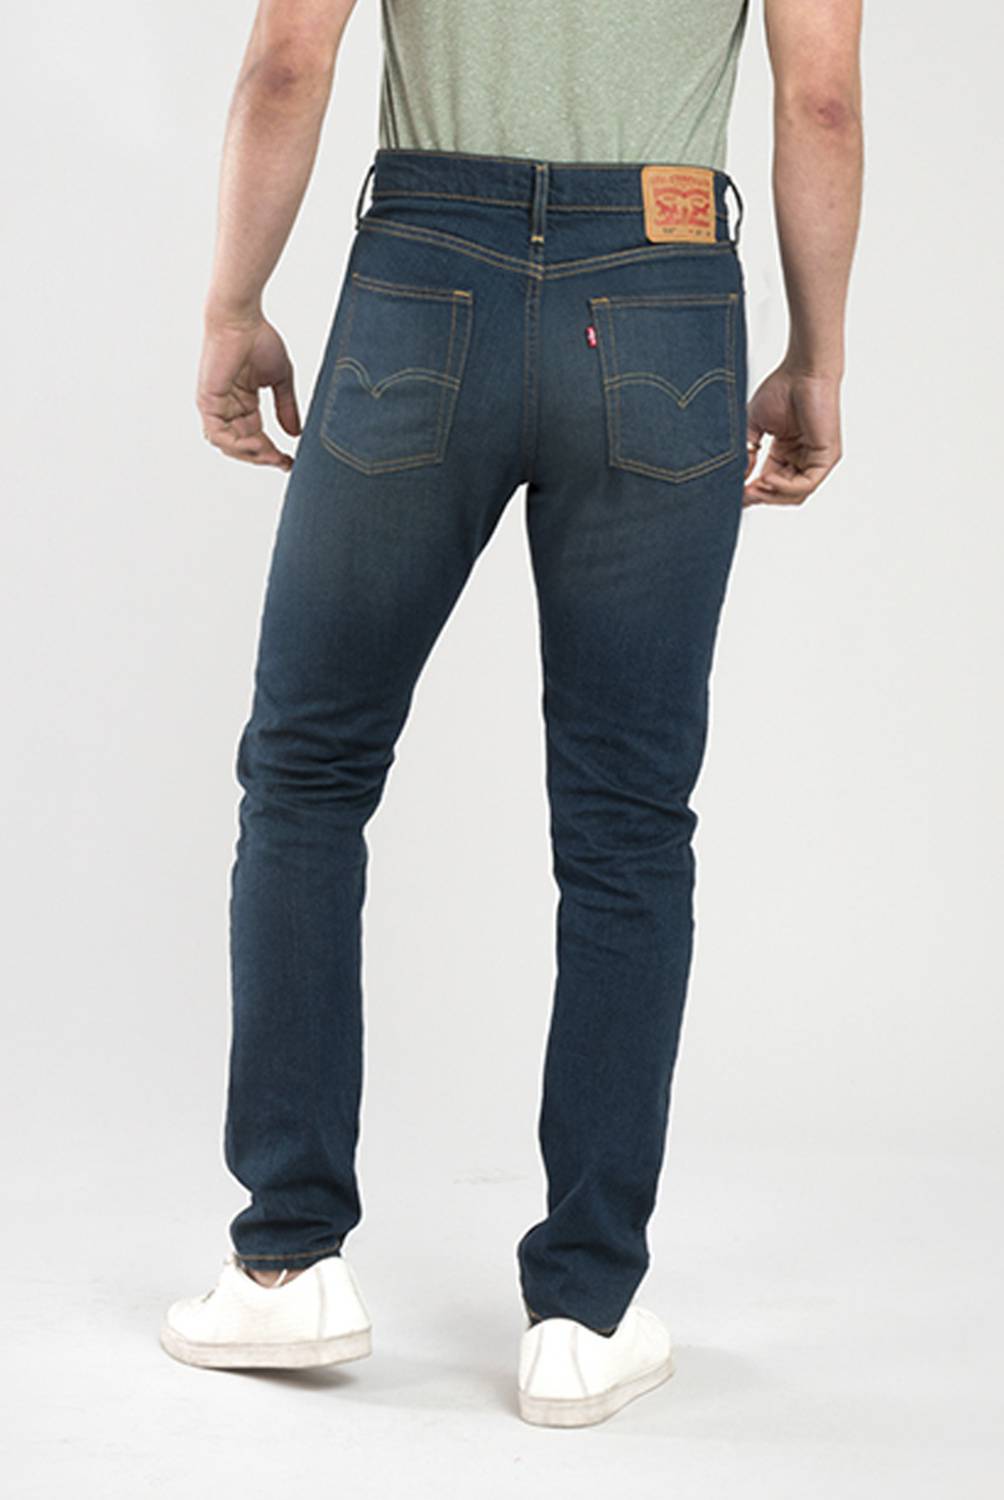 LEVIS - Jeans Skinny 510 Hombre